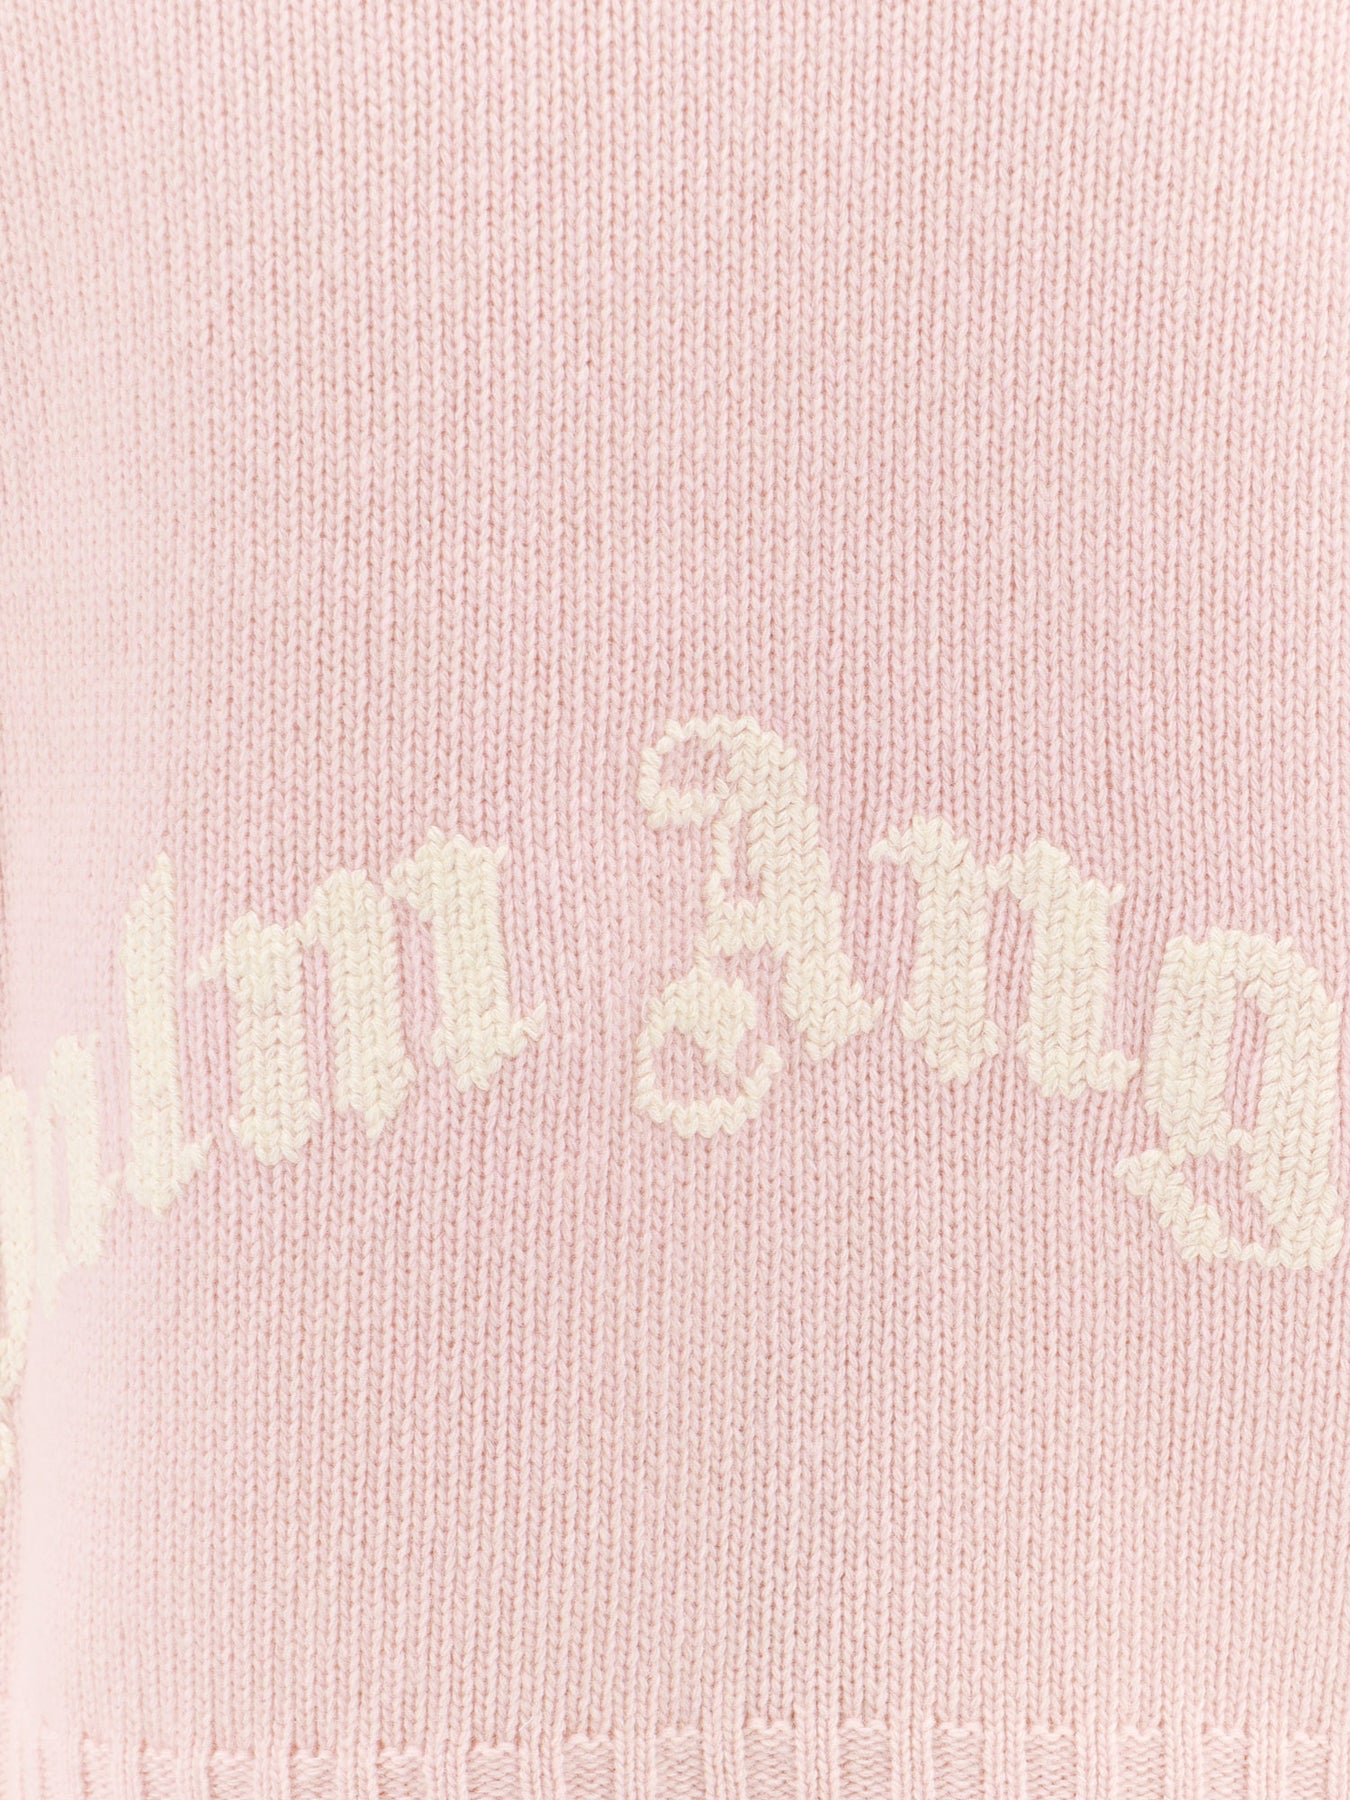 Shop Palm Angels Sweater In Black/white